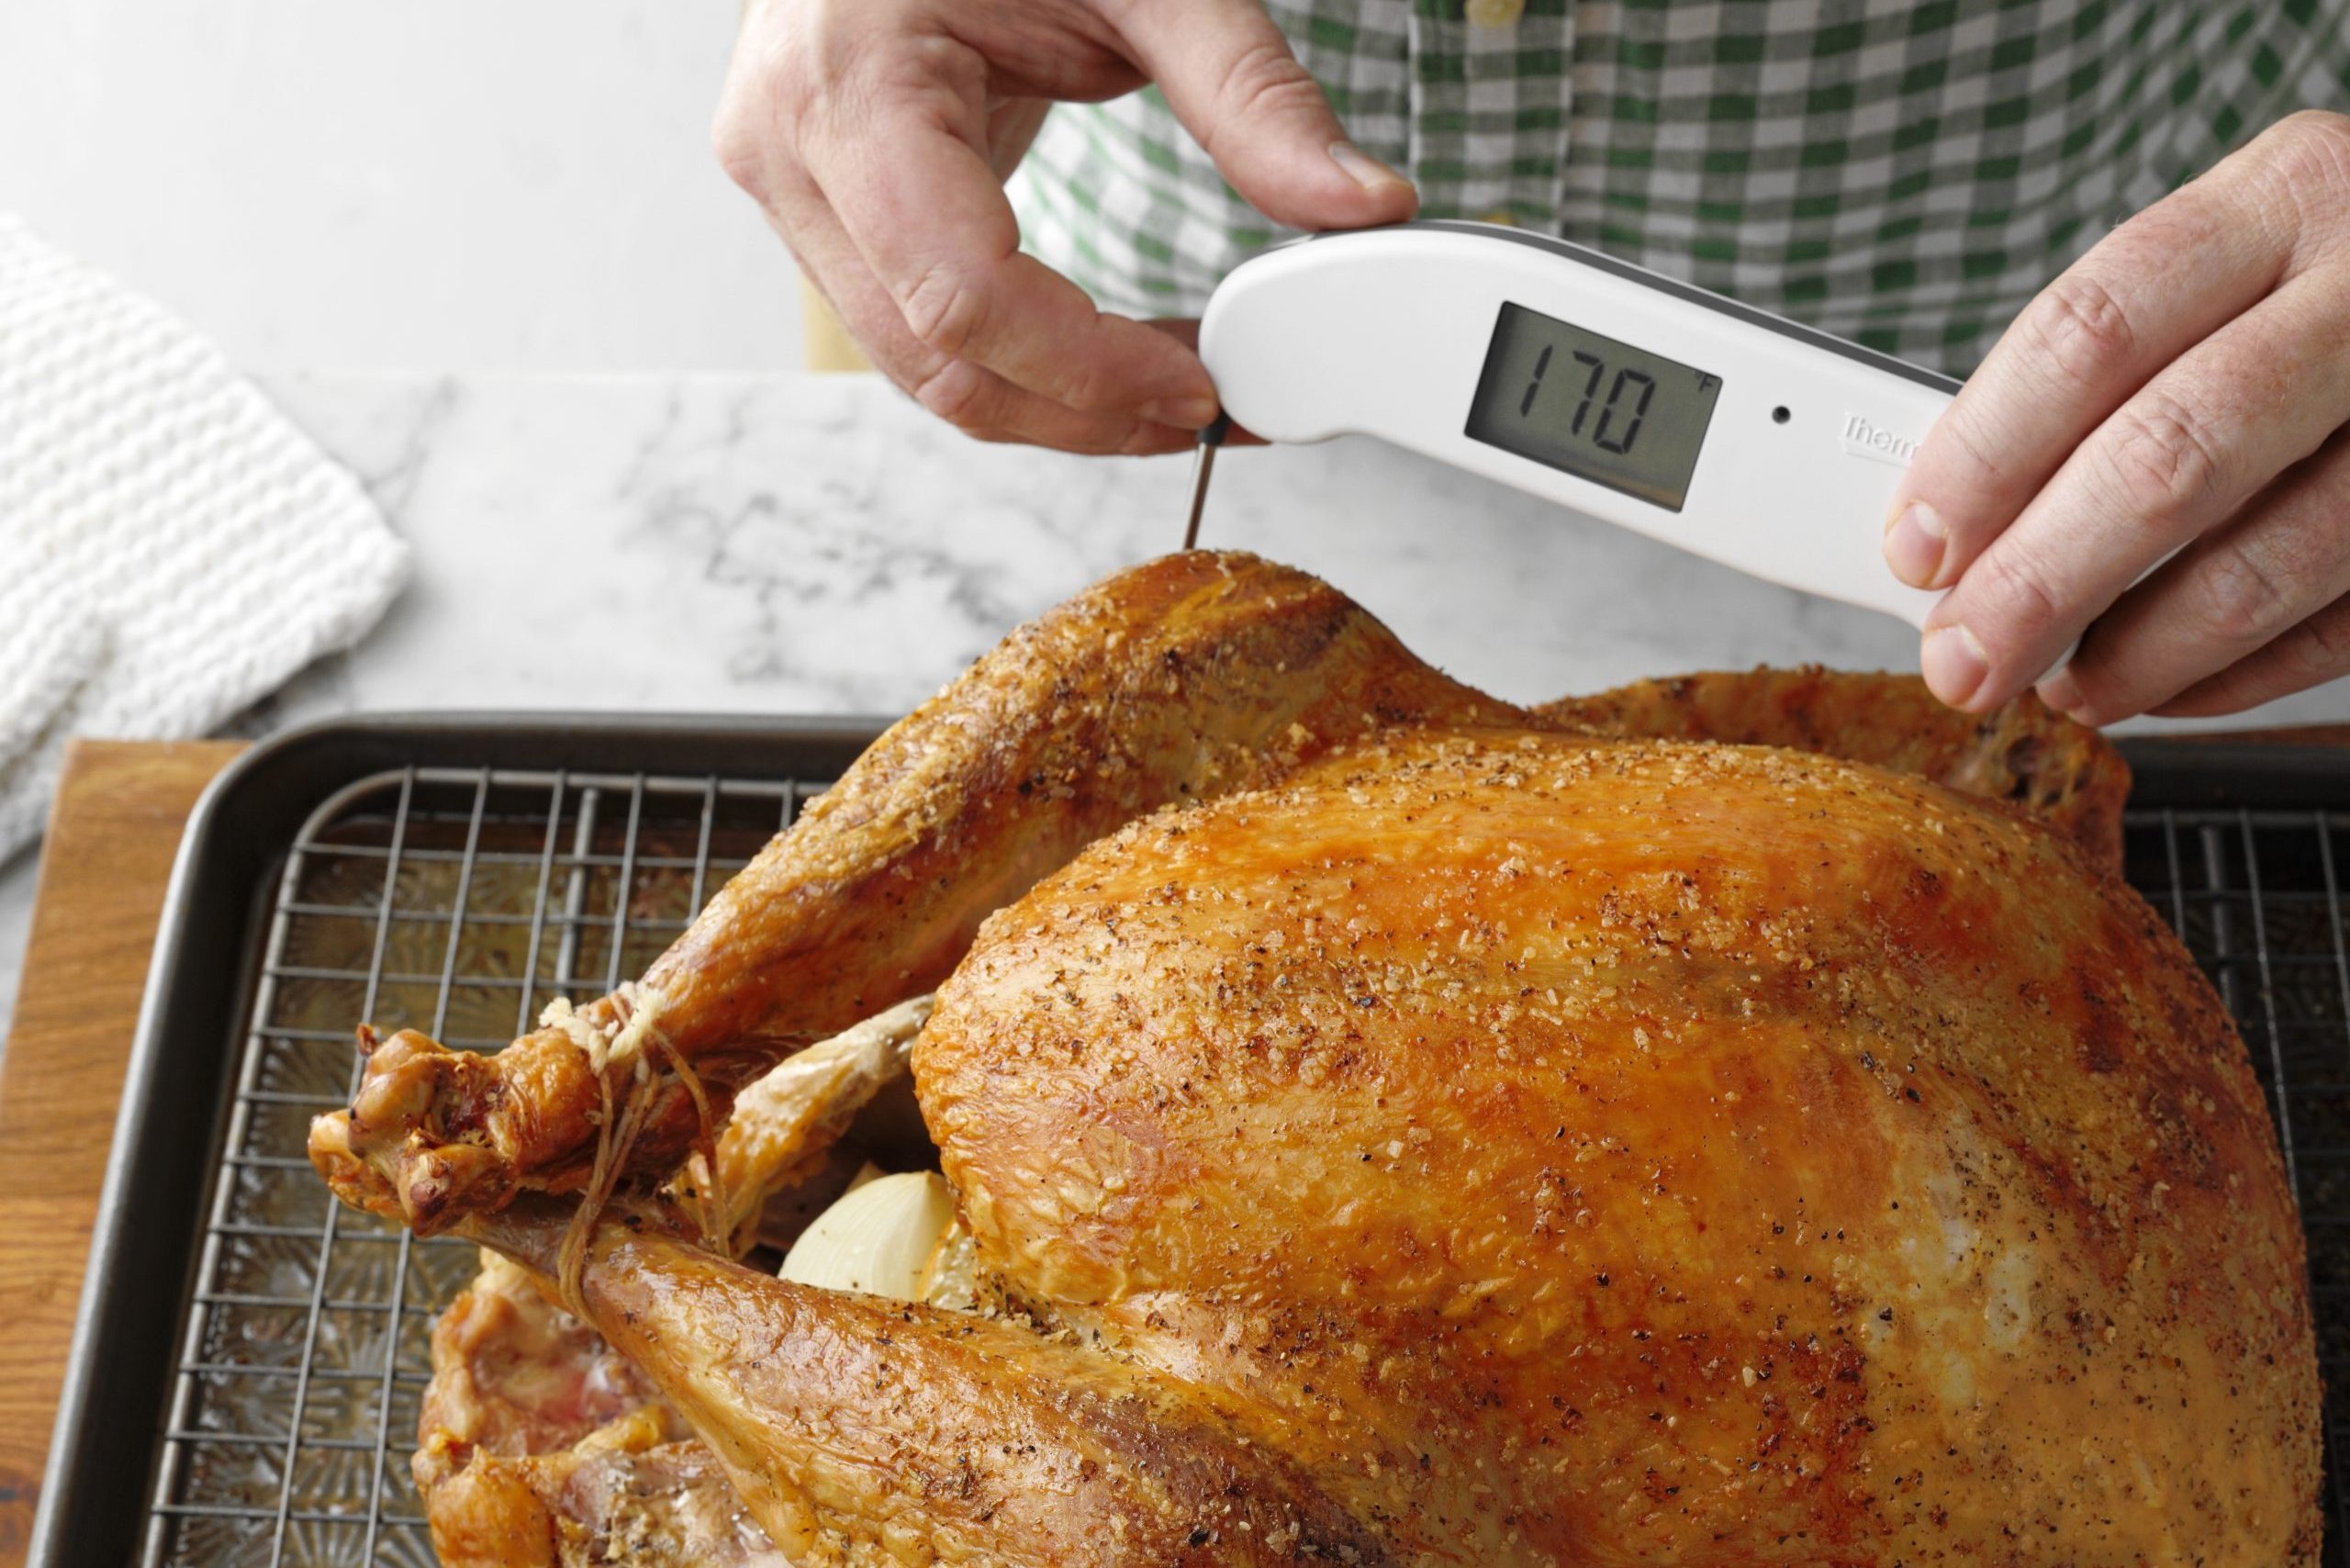 Rosting a Christmas Turkey with this Dual Pop Up Timer Set on Vimeo